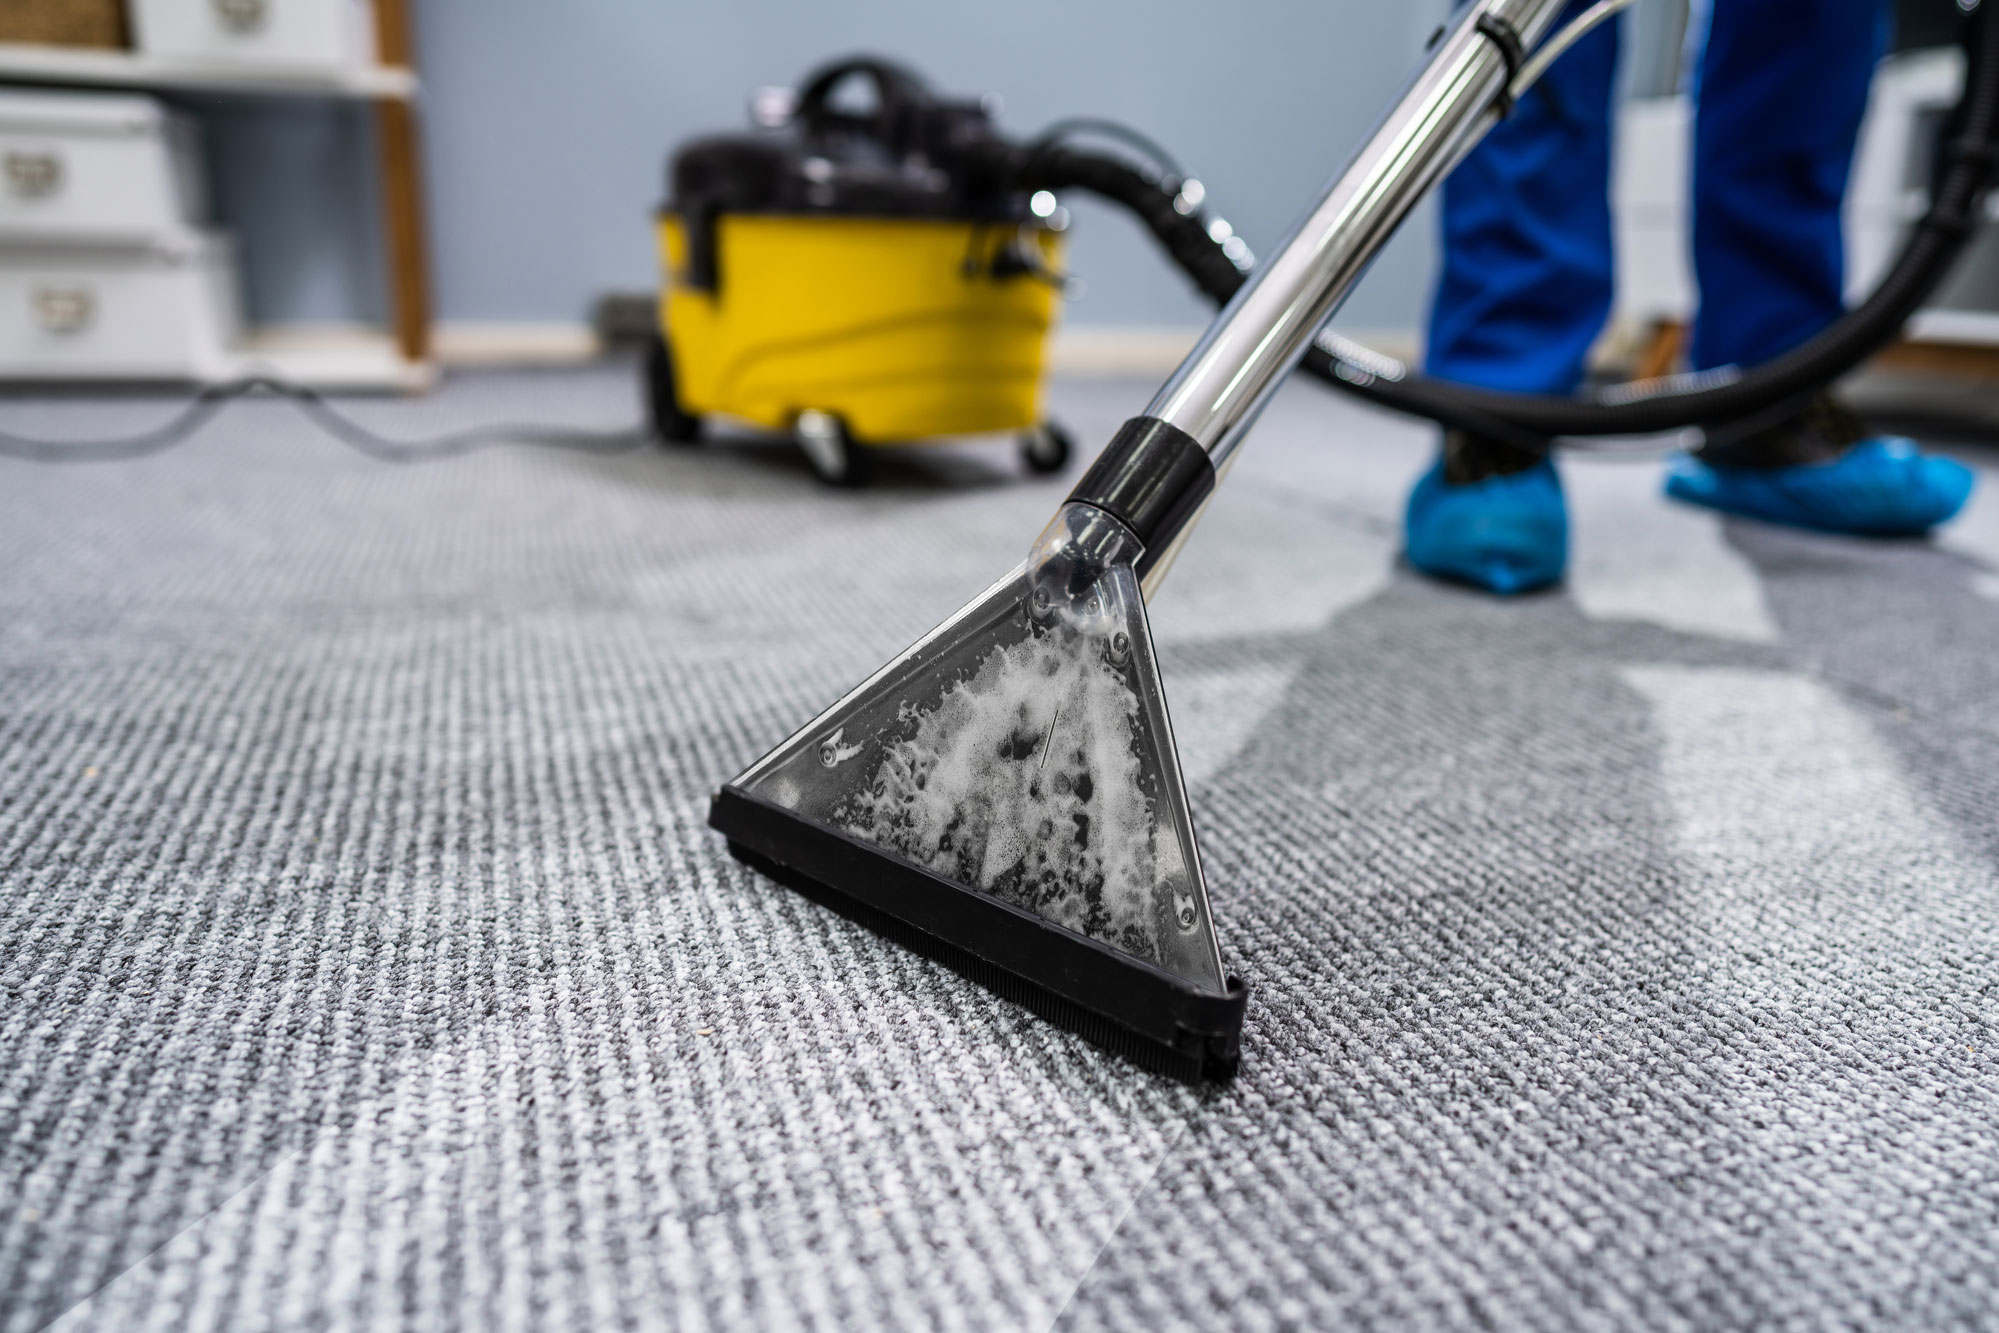 Commercial Carpet Cleaning In Littleton Co